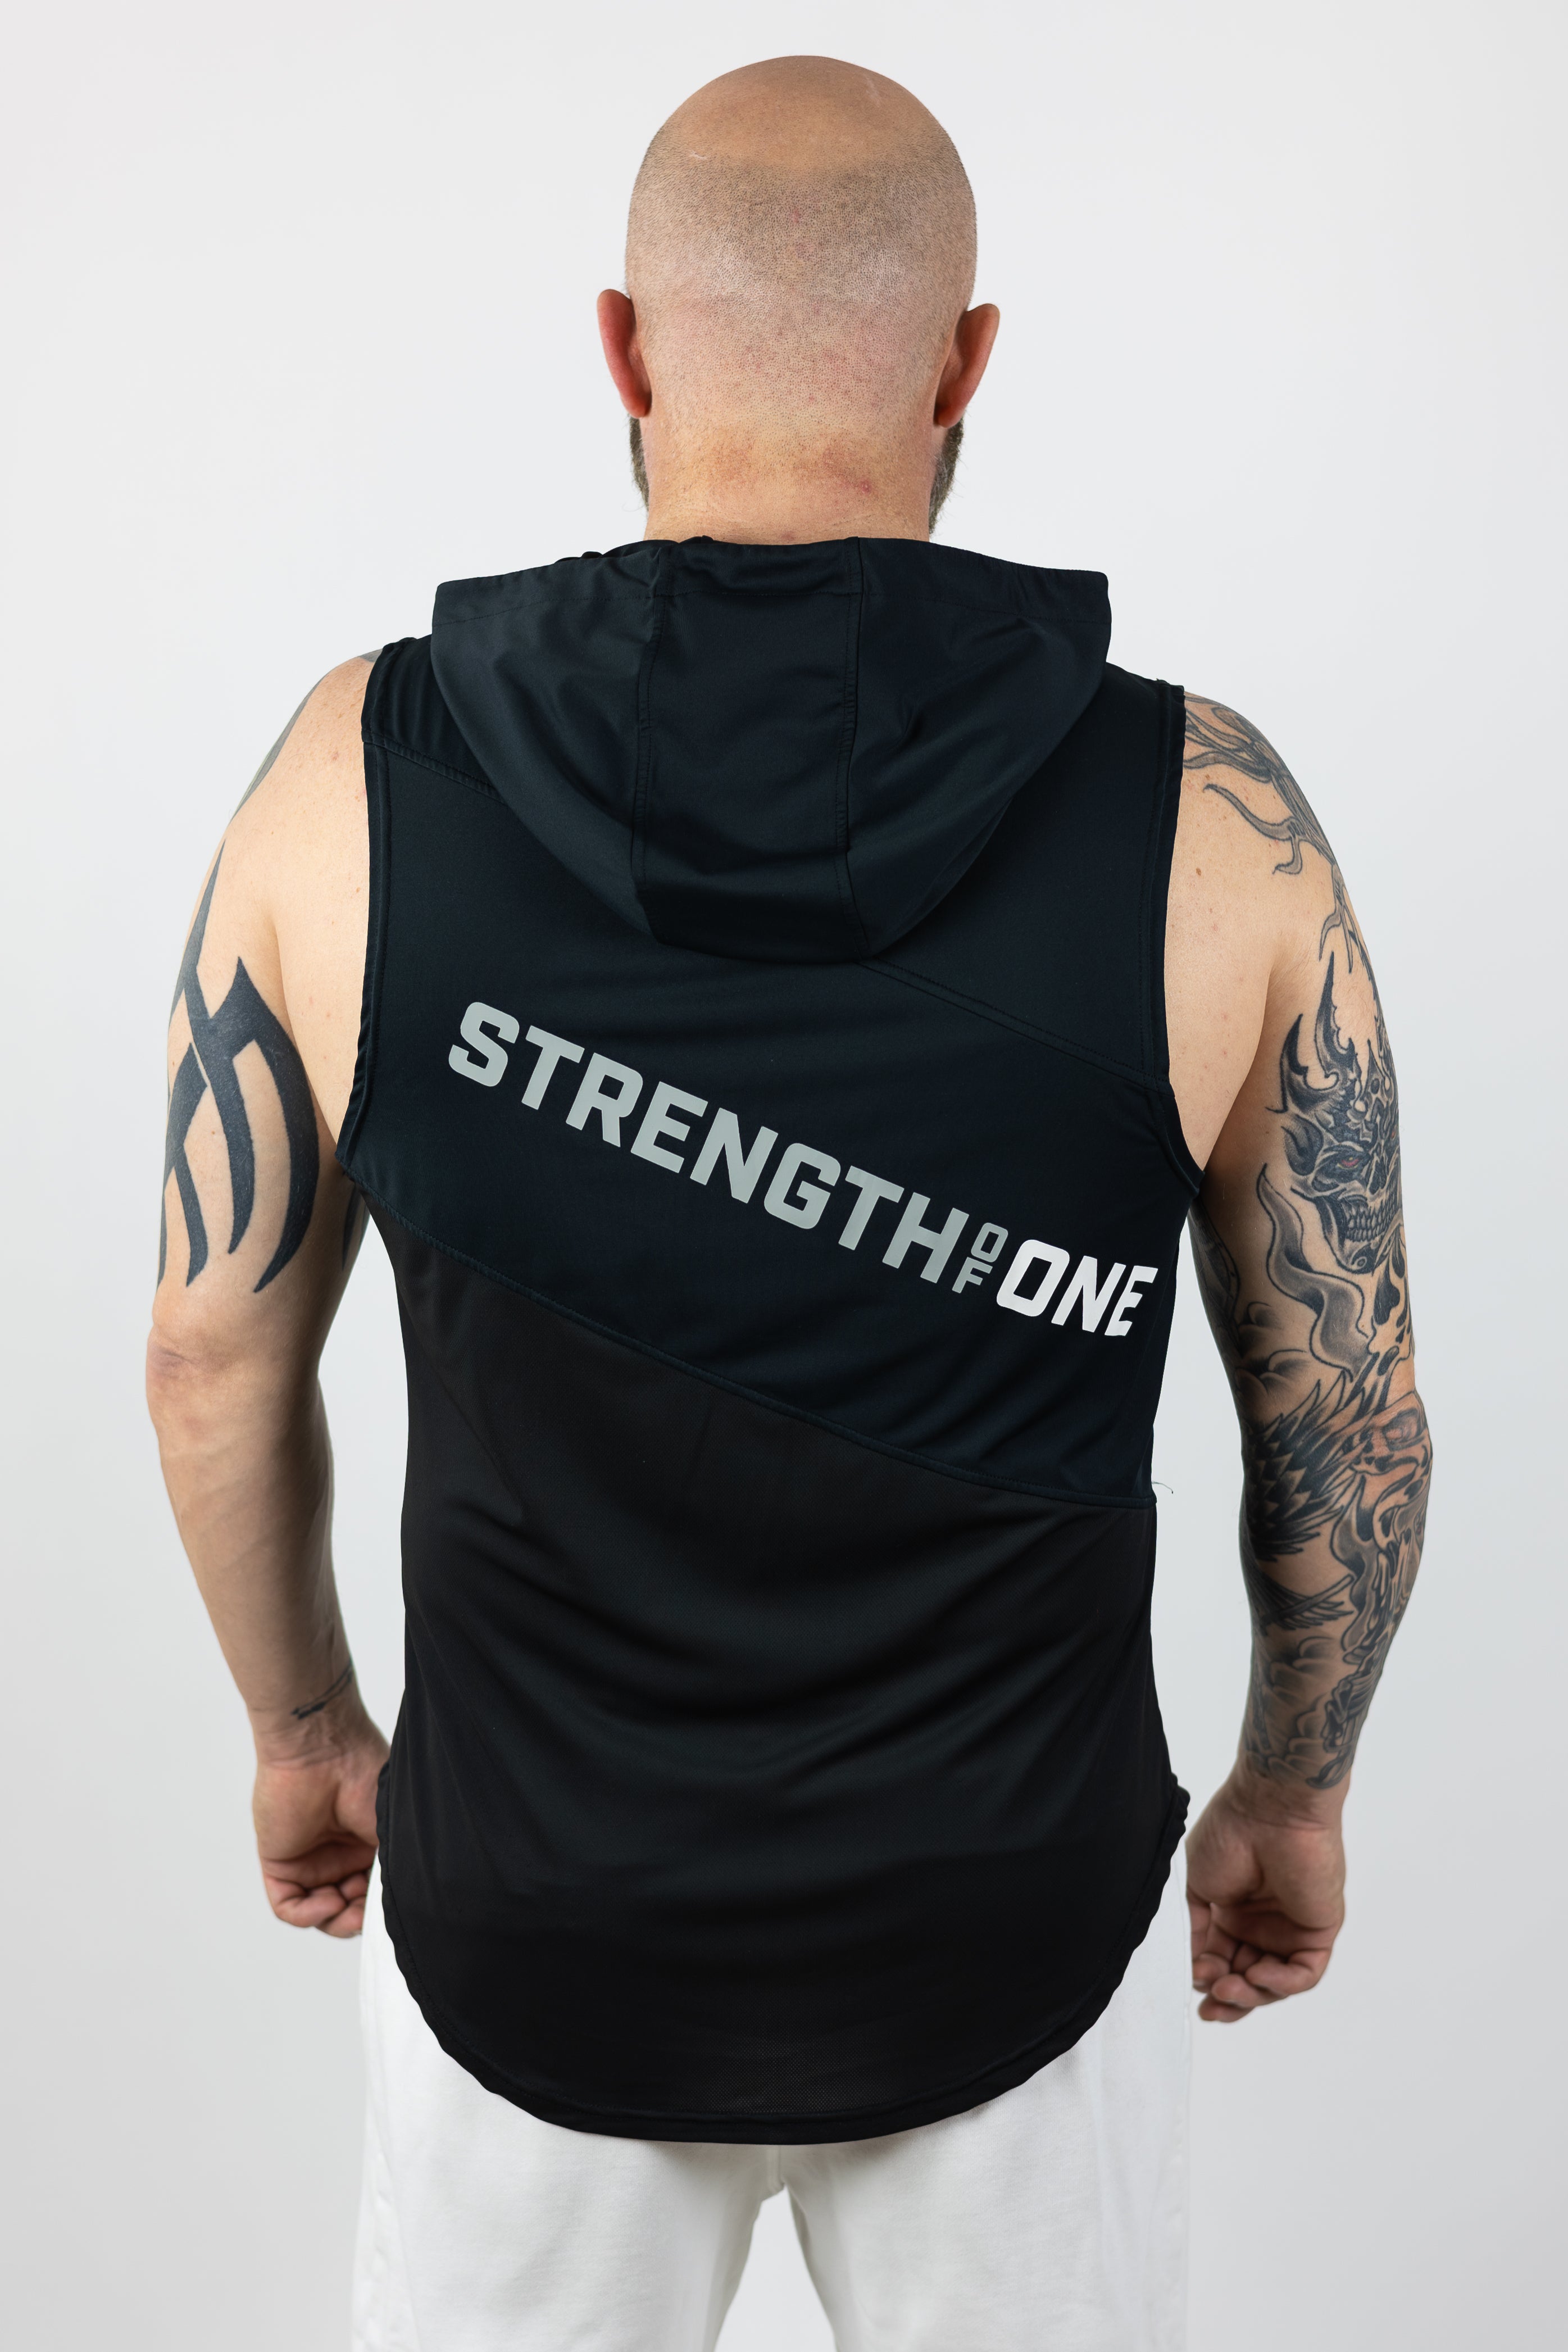 rear view of man wearing strength of one black hooded tank top with logo stretching angled down backside